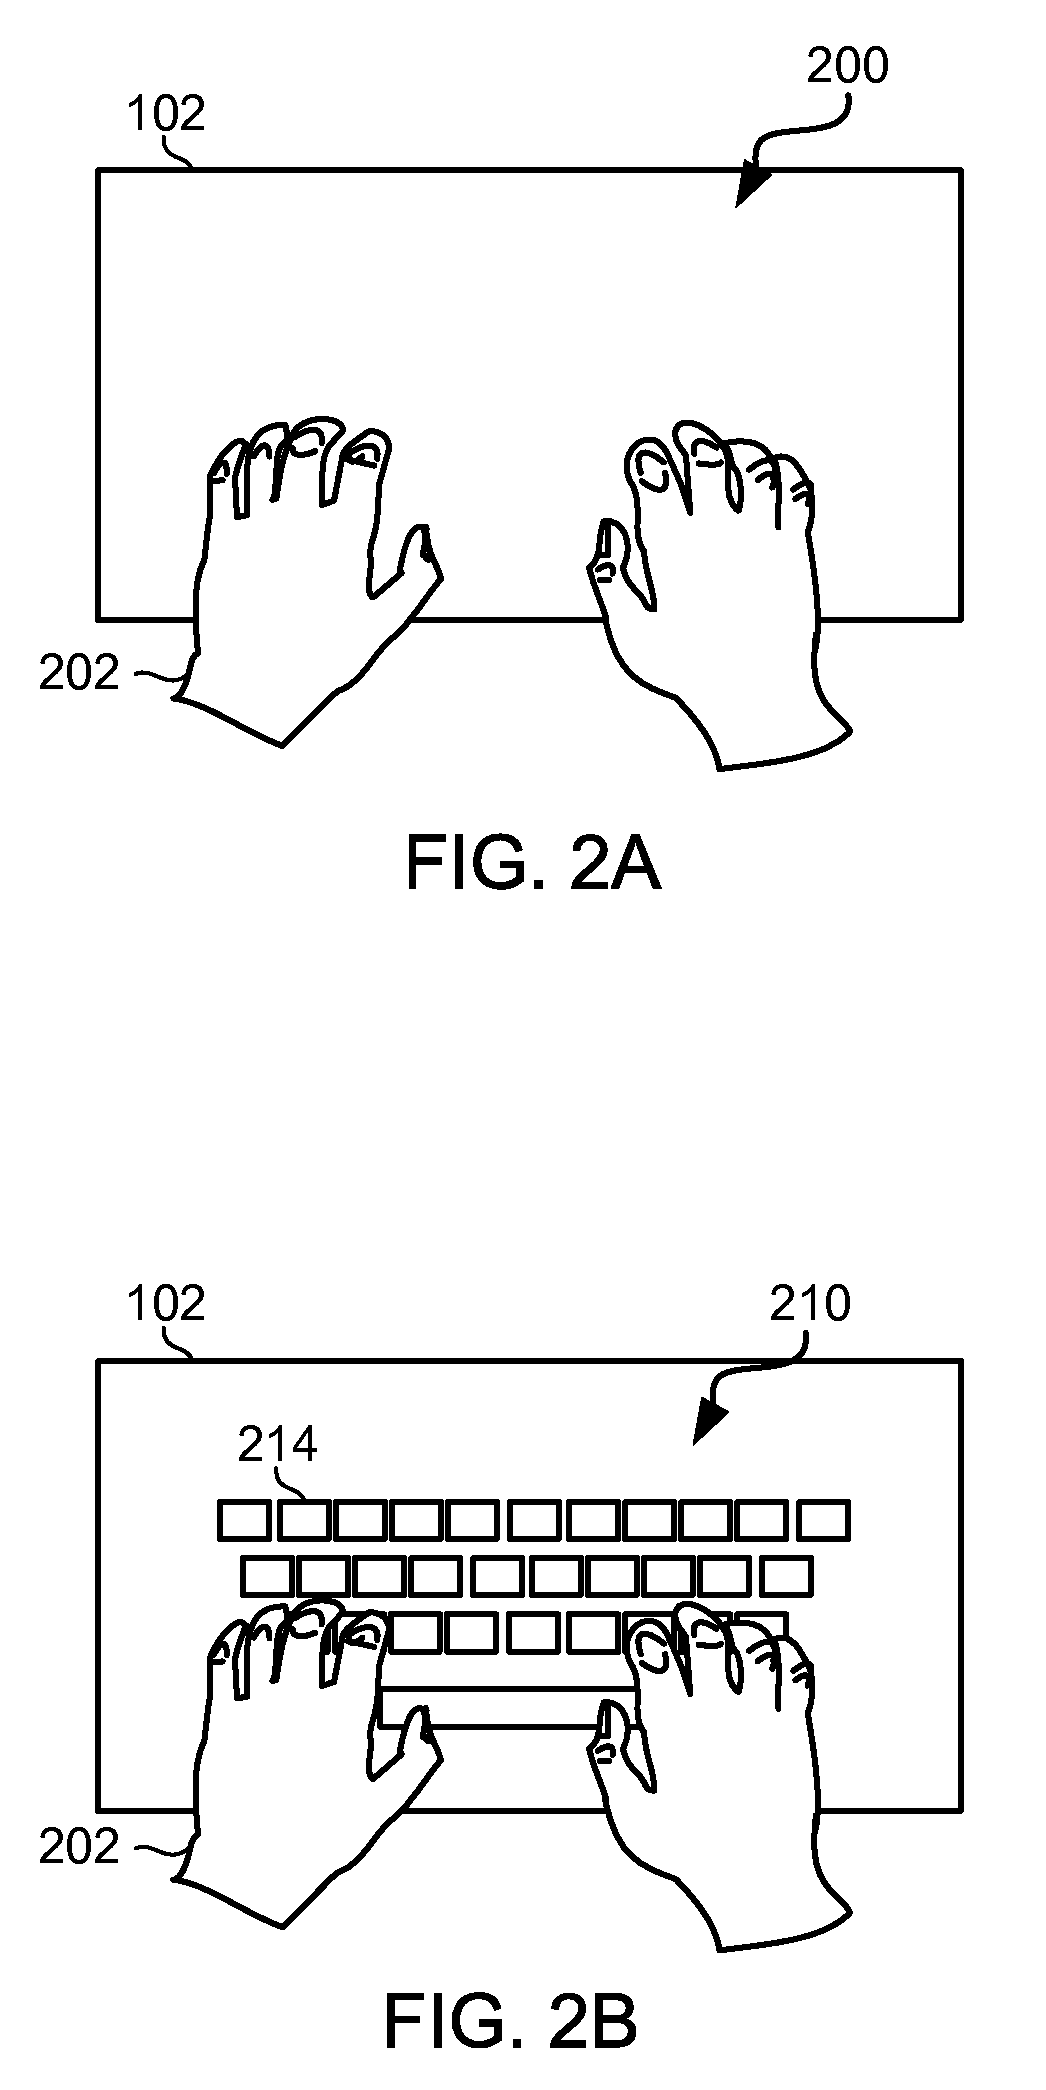 Auto-morphing adaptive user interface device and methods